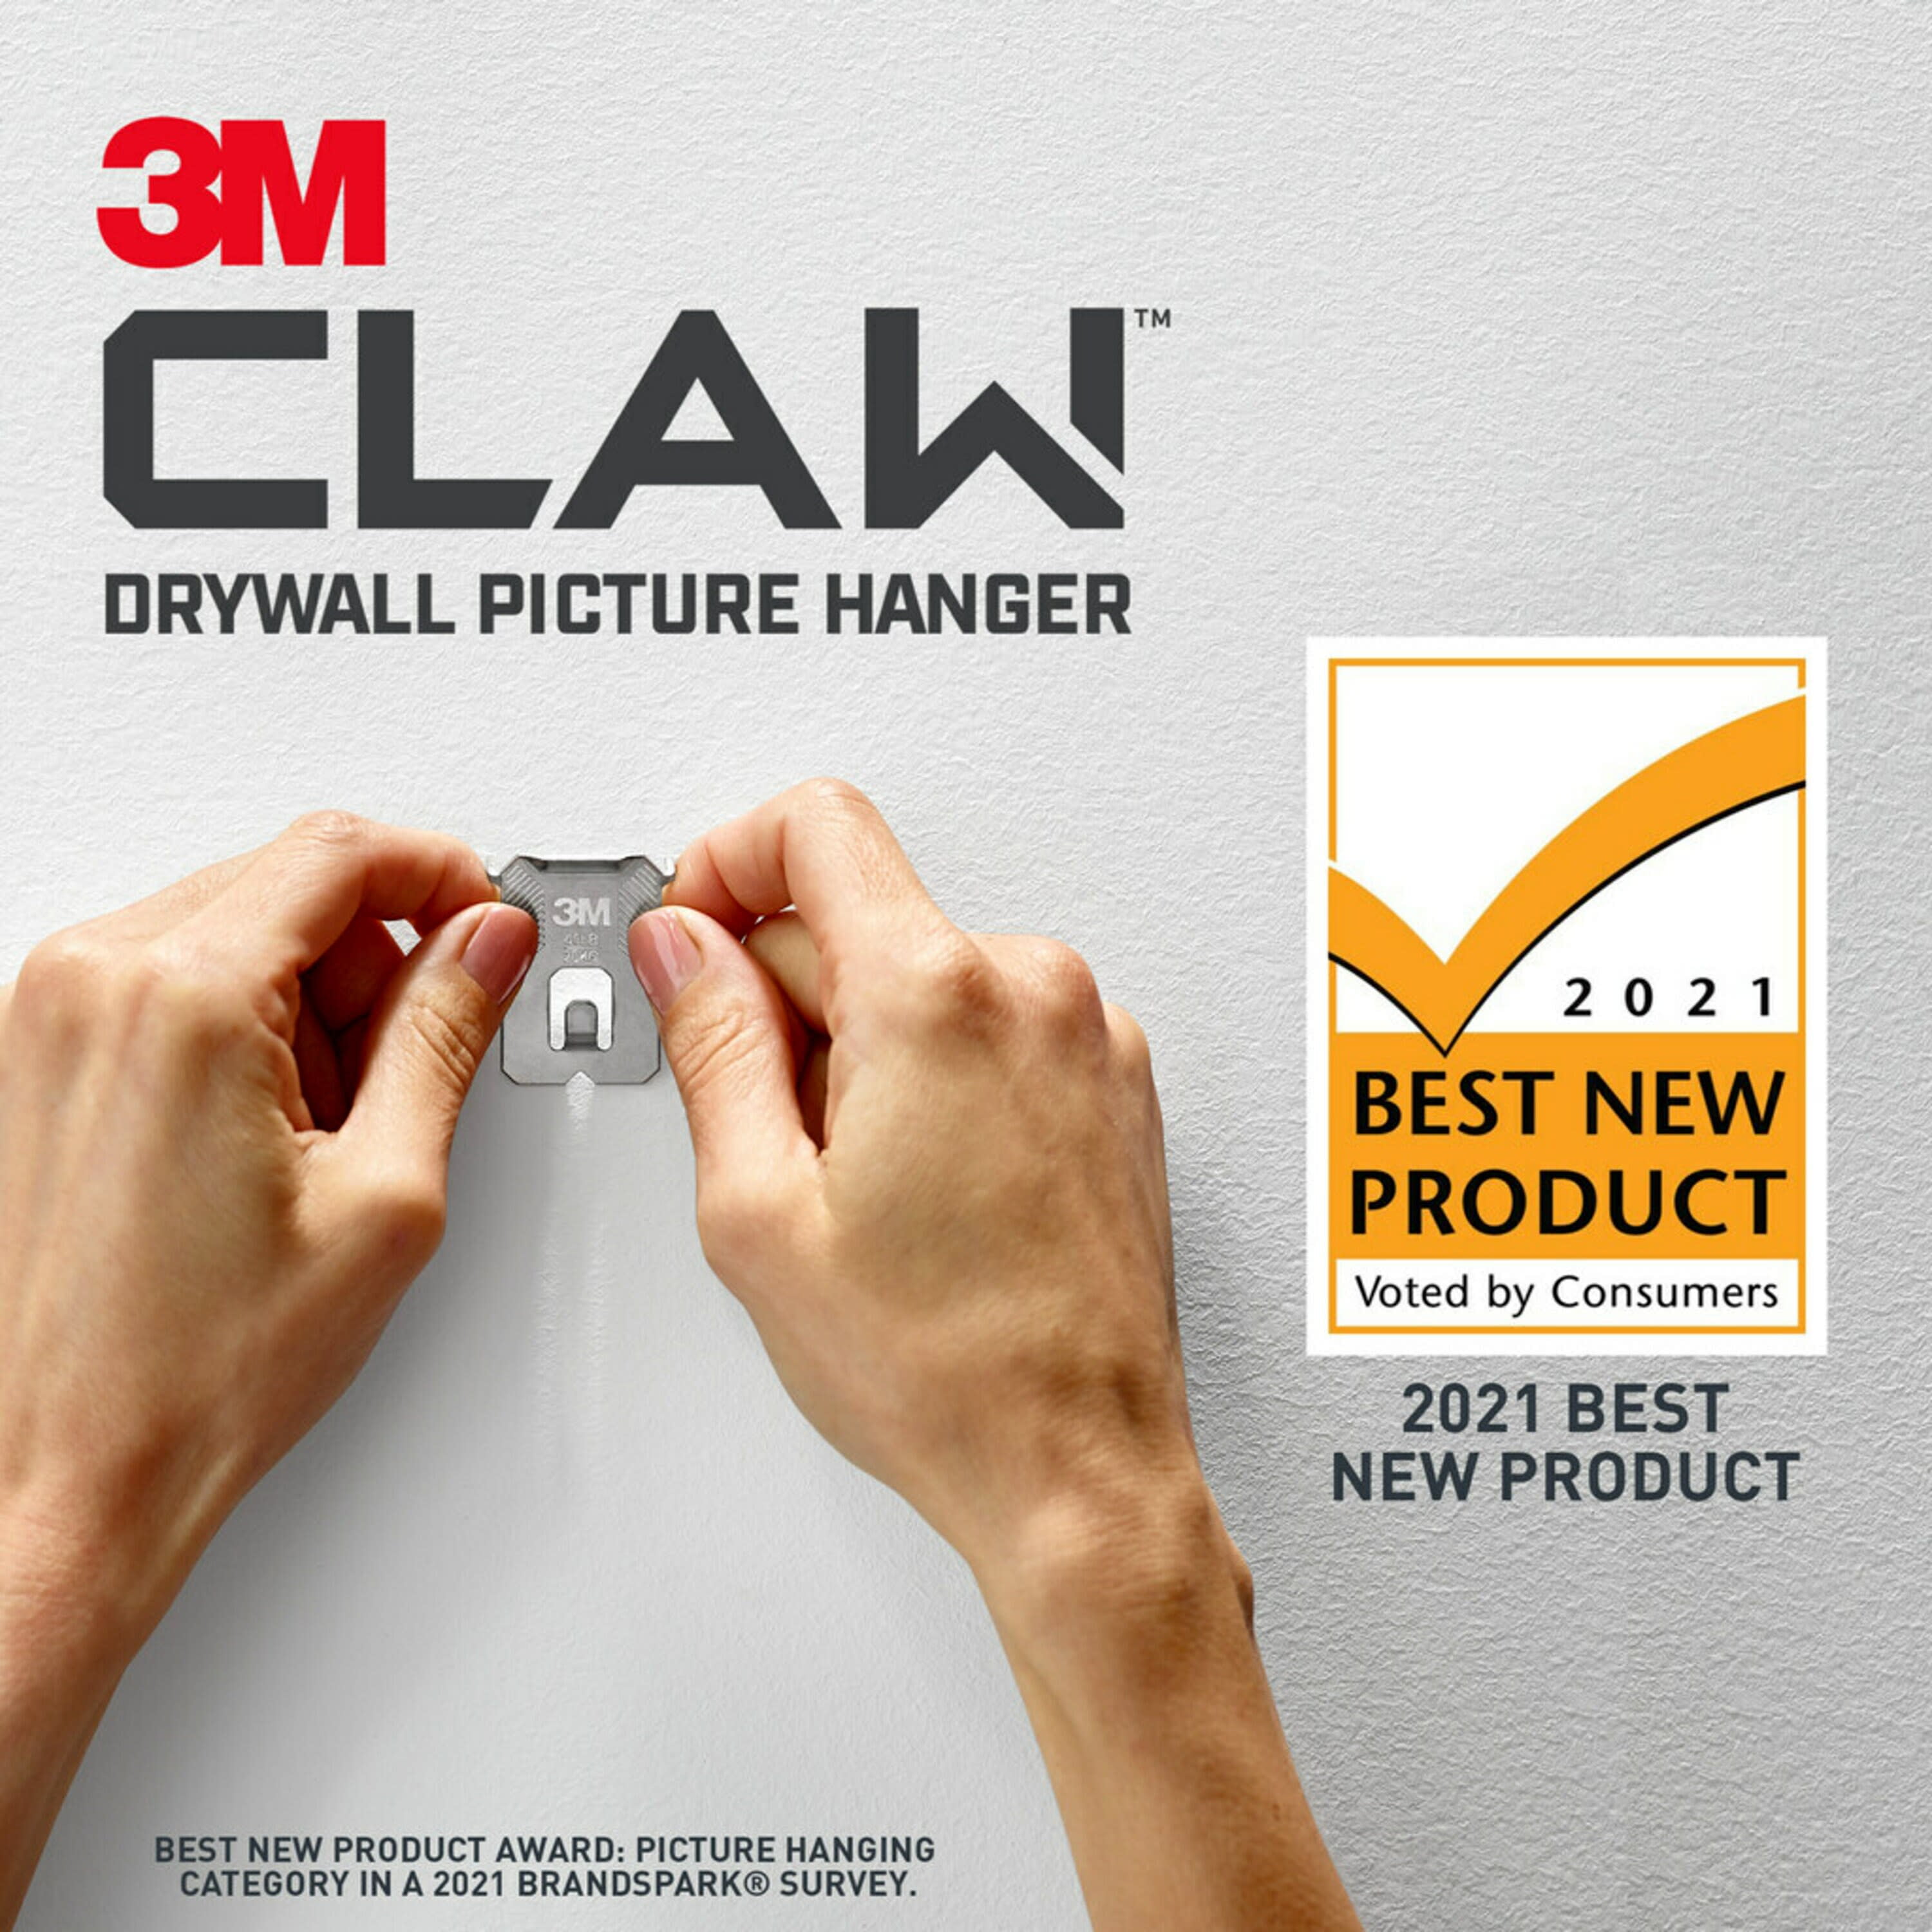 3M CLAW Drywall Picture Hanger with Spot Marker, Holds 25 lbs, 10 Hangers,  5 Markers 